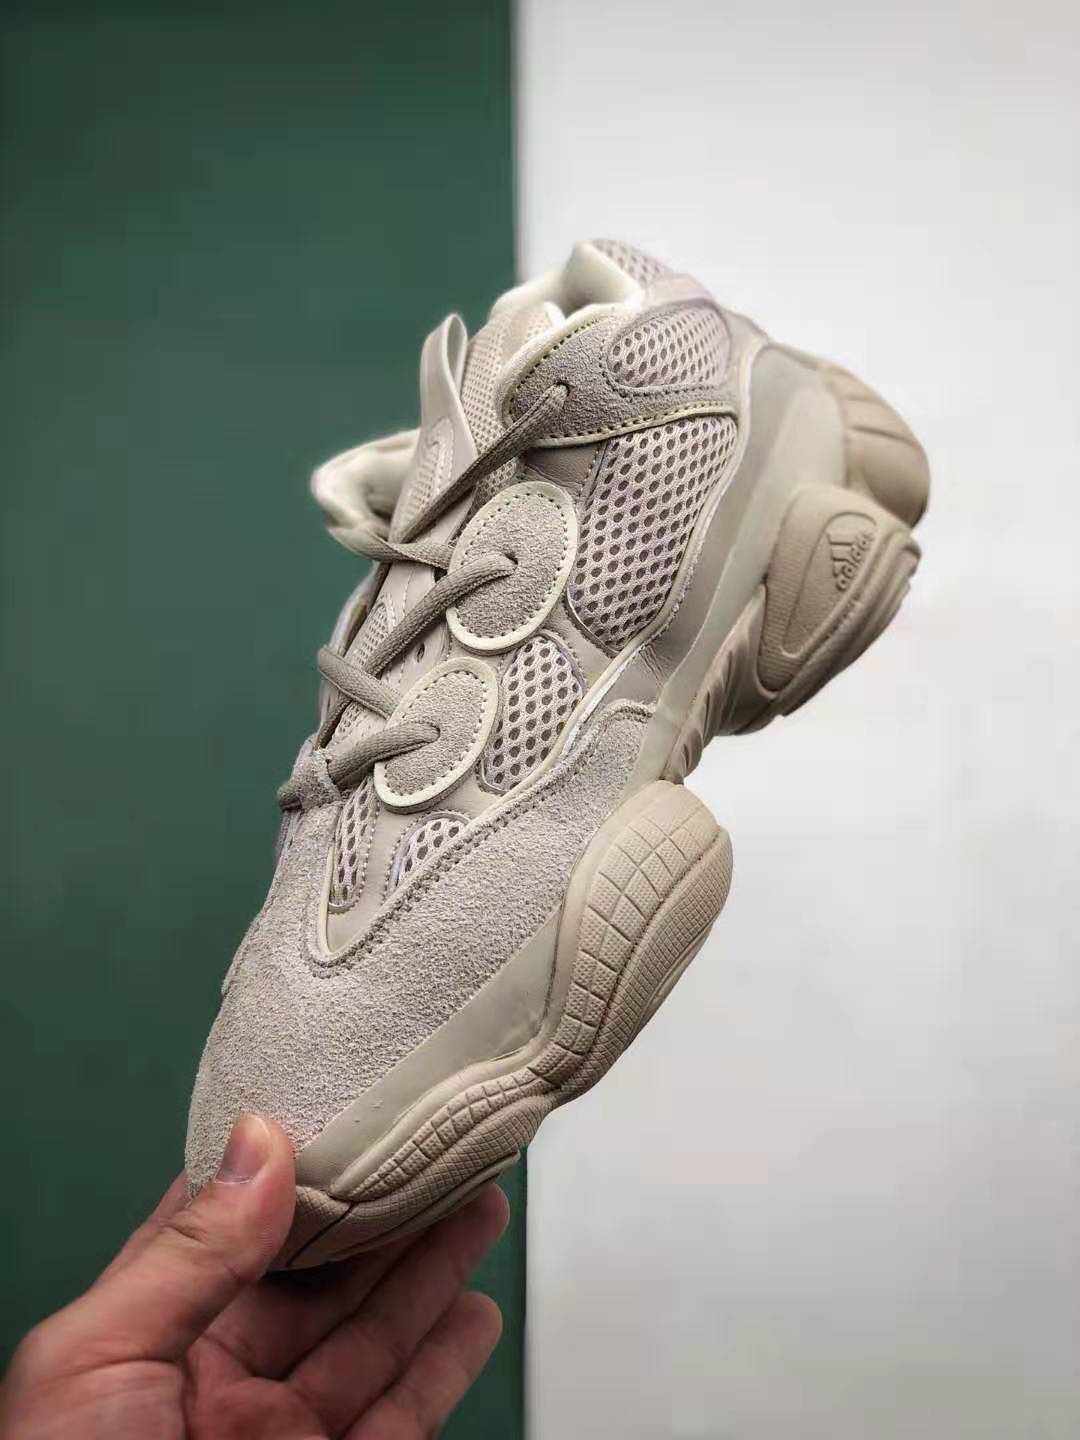 Adidas Yeezy 500 'Blush' DB2908 - Shop the Trendy Sneakers Now!